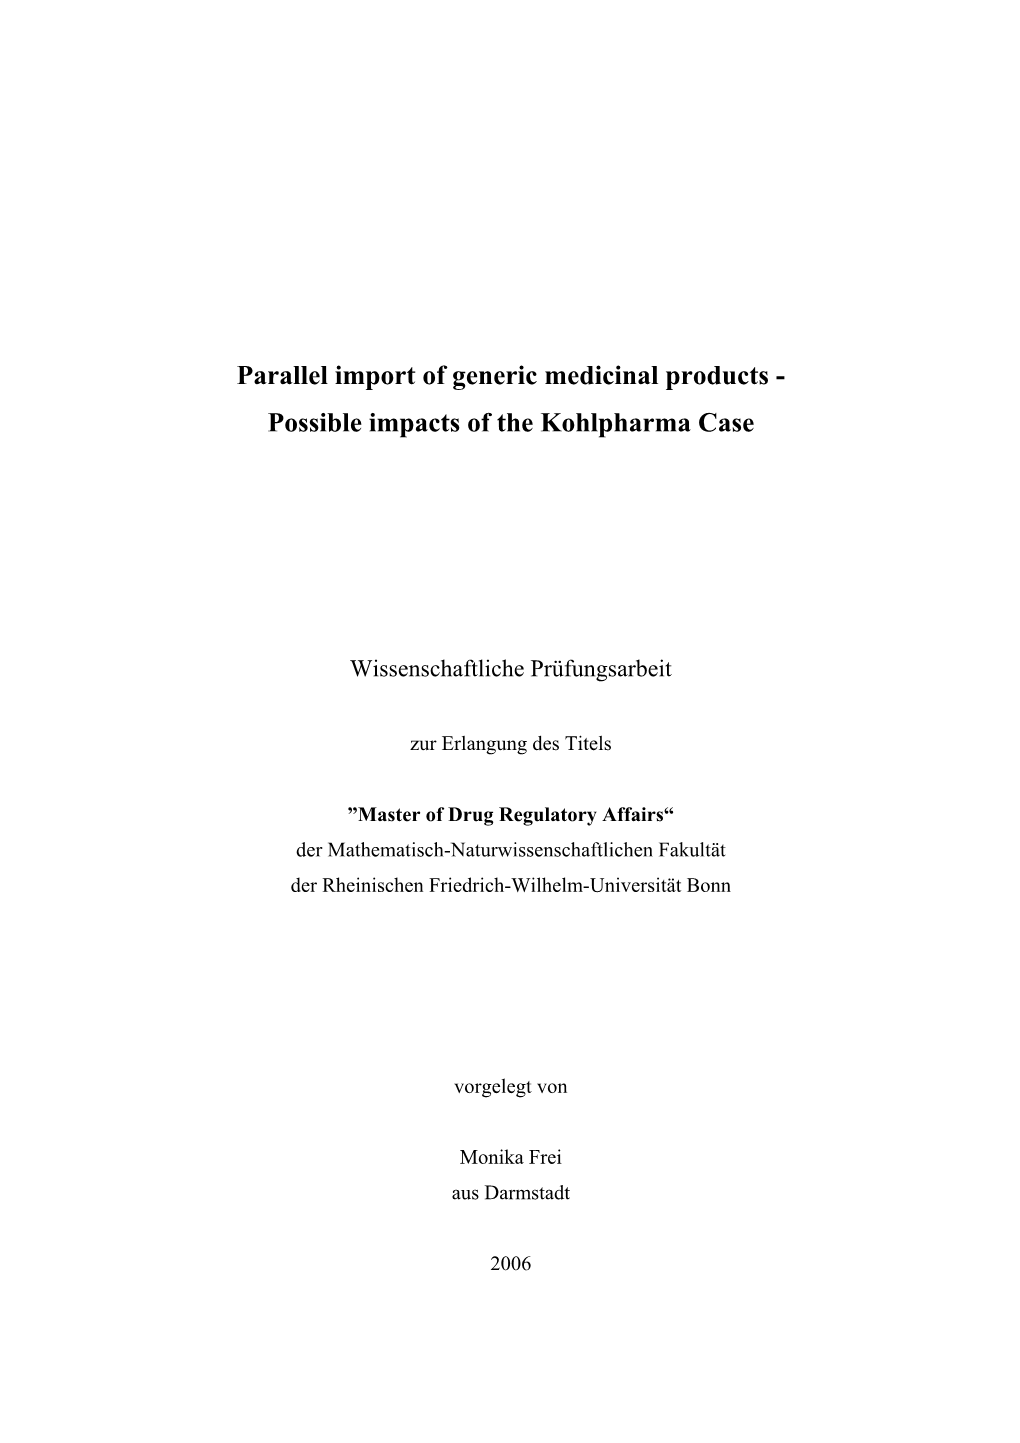 Parallel Import of Generic Medicinal Products - Possible Impacts of the Kohlpharma Case